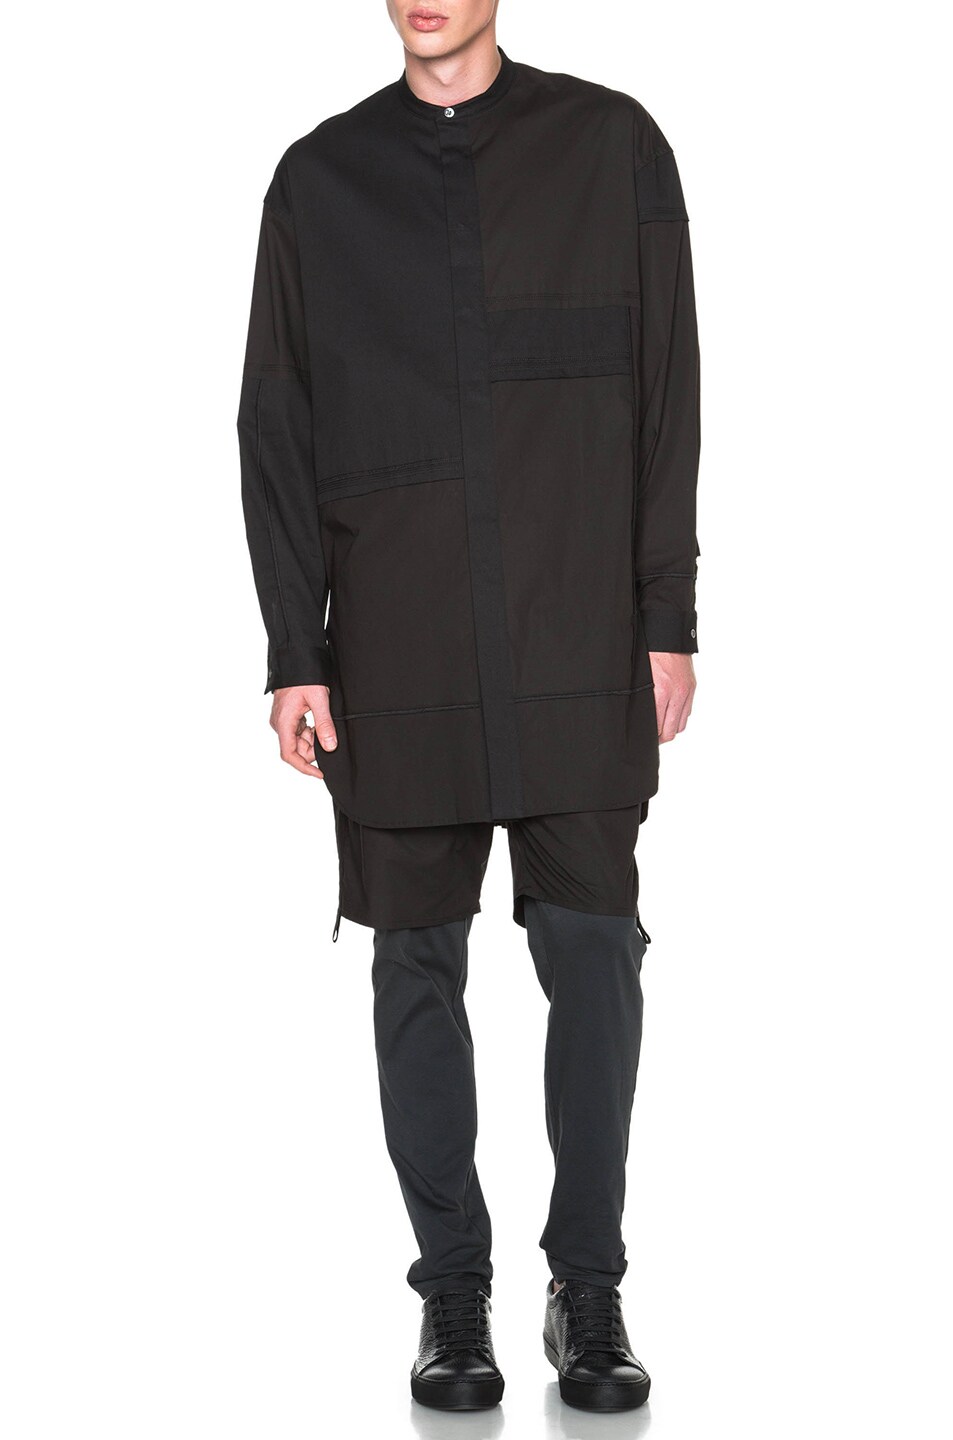 Image 1 of 3.1 phillip lim Mixed Embroidery Stitch Button Up in Black